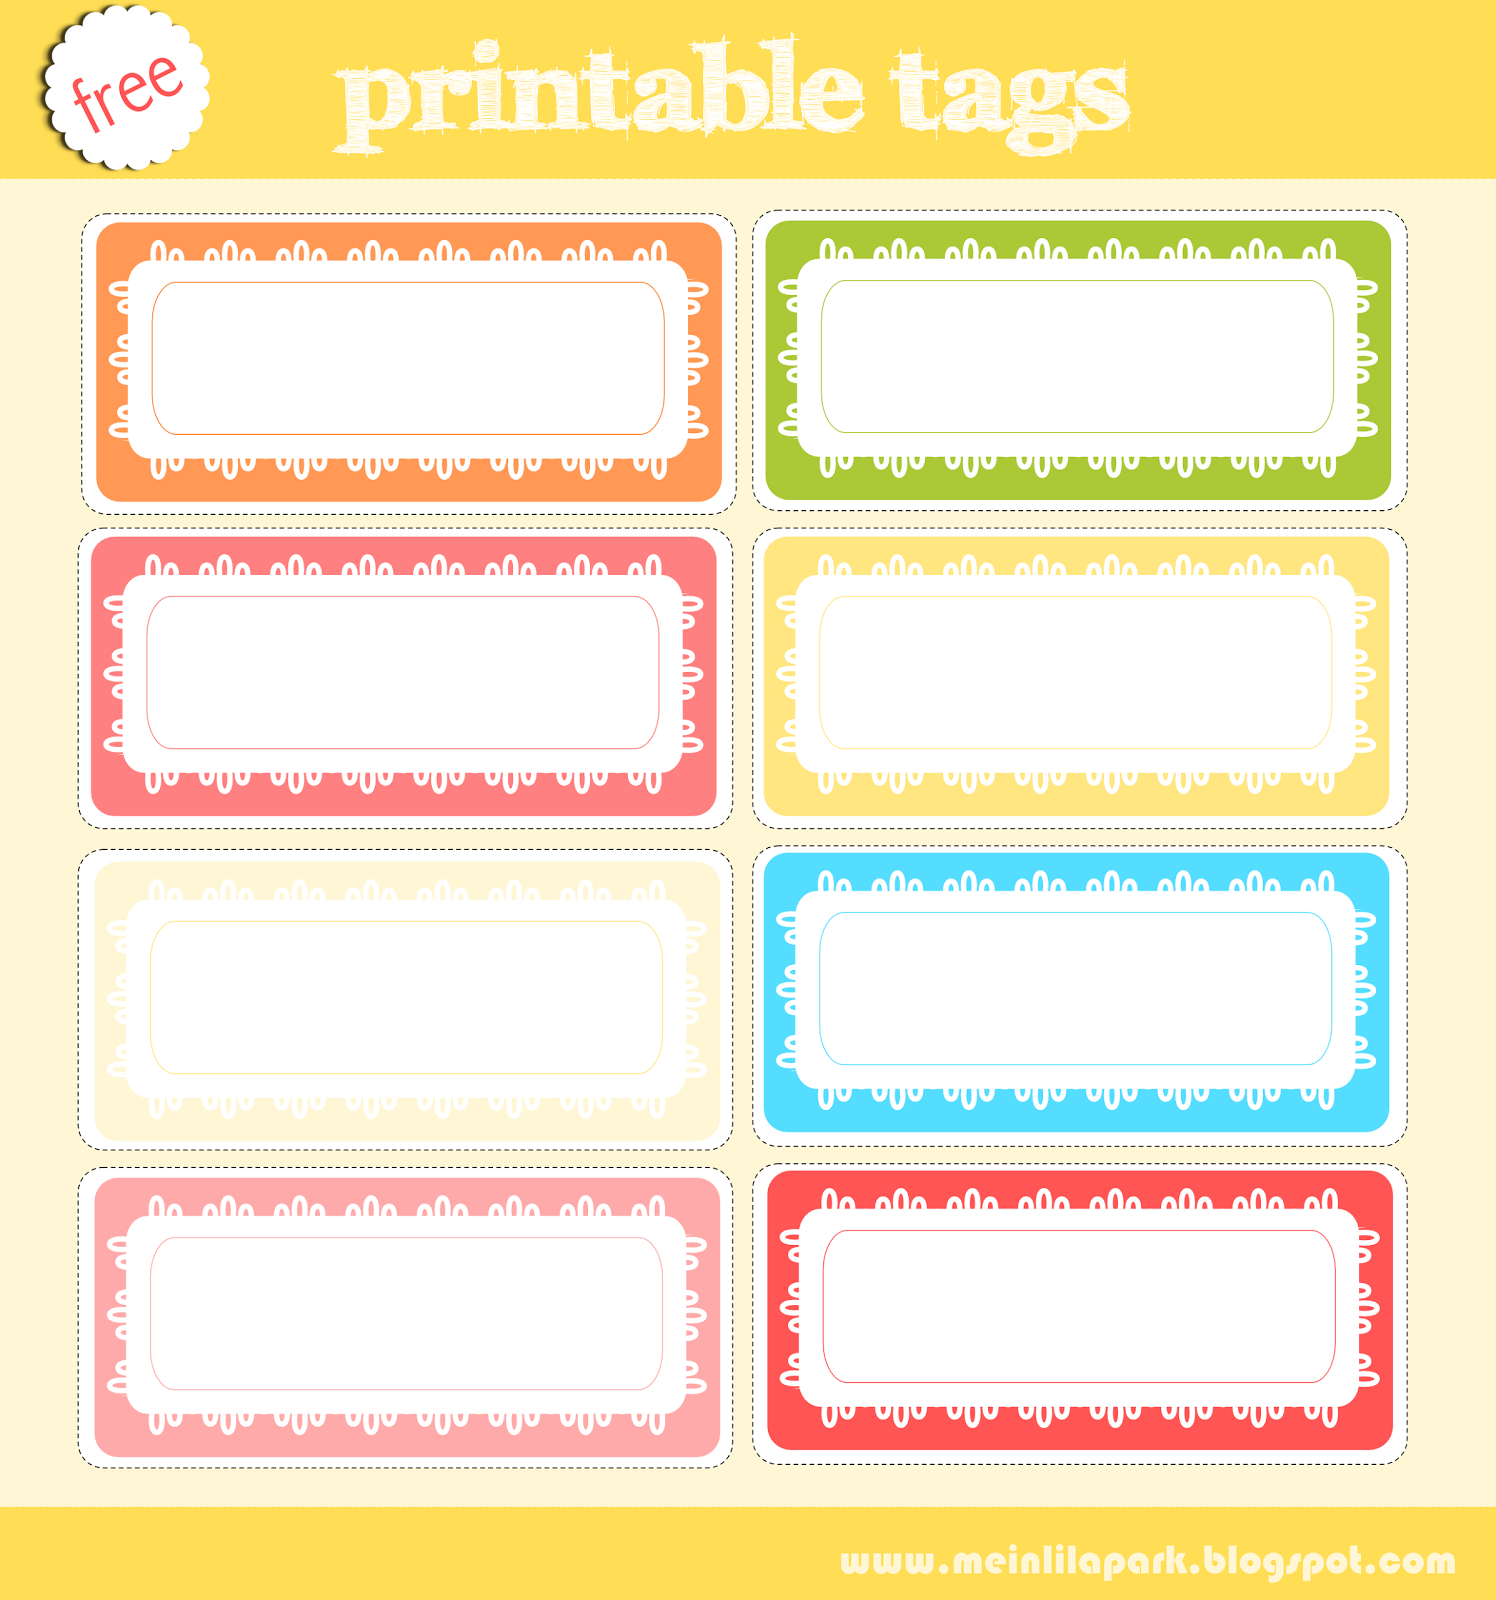 free printable tag collection and digital scrapbooking embellishment